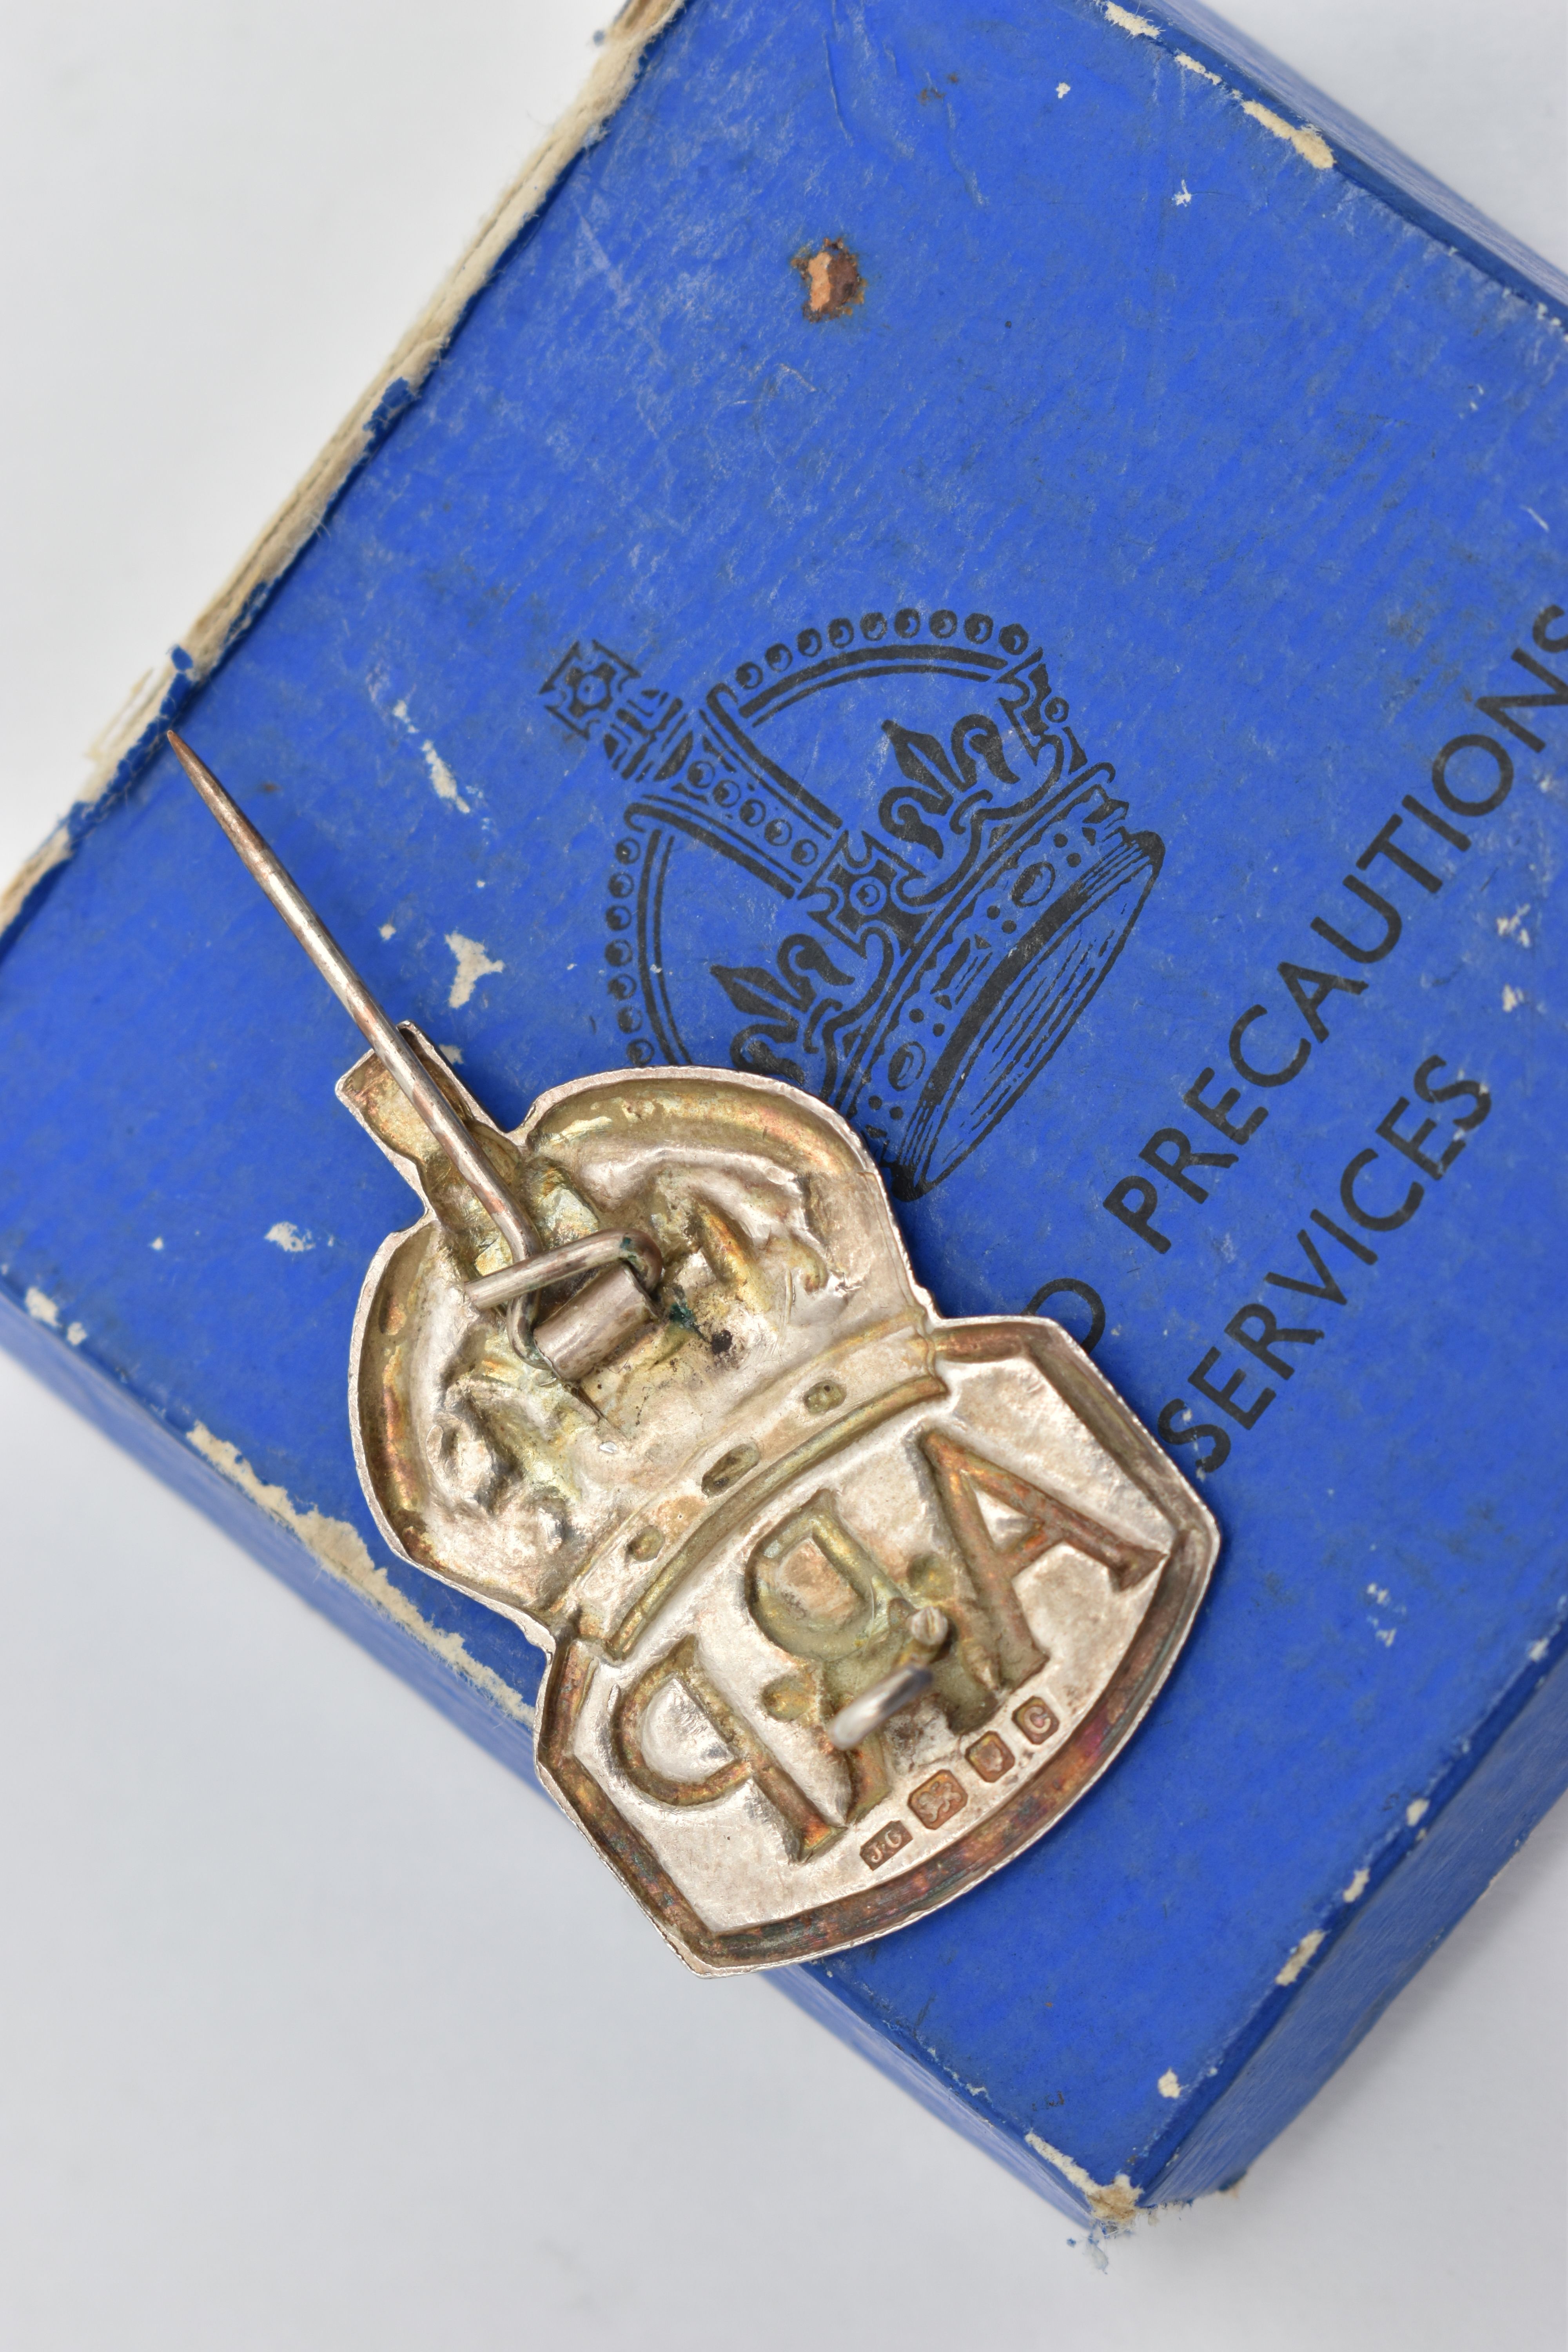 A SILVER 'A.R.P' BADGE, hallmarked 'Royal Mint' London 1938, fitted with pin and C clasp, - Image 3 of 3